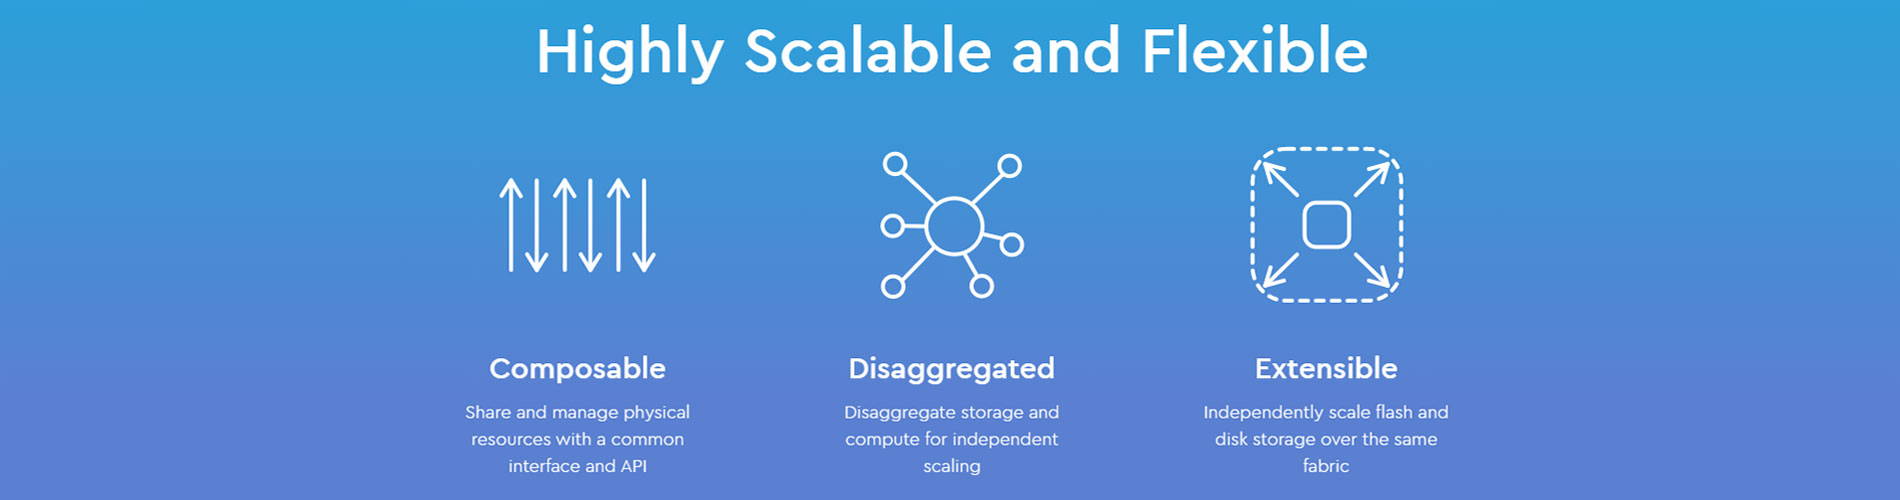 Highly Scalable and Flexible